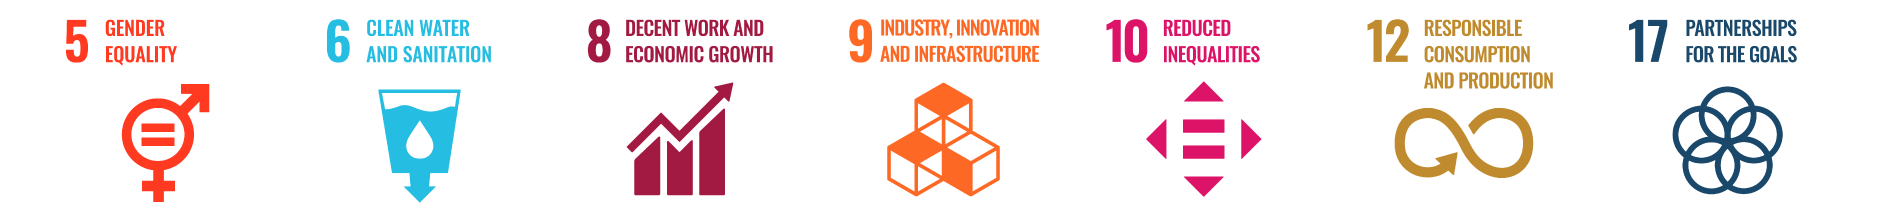 Icons for SDG 5 Gender Equality; SDG 6 Clean Water and Sanitation; SDG 8 Decent Work and Economic Growth; SDG 9 Industry Innovation and Infrastructure; SDG 10 Reduced Inequalities; SDG 12 Responsible Consumption and Production; SDG 17 Partnerships for the Goals.